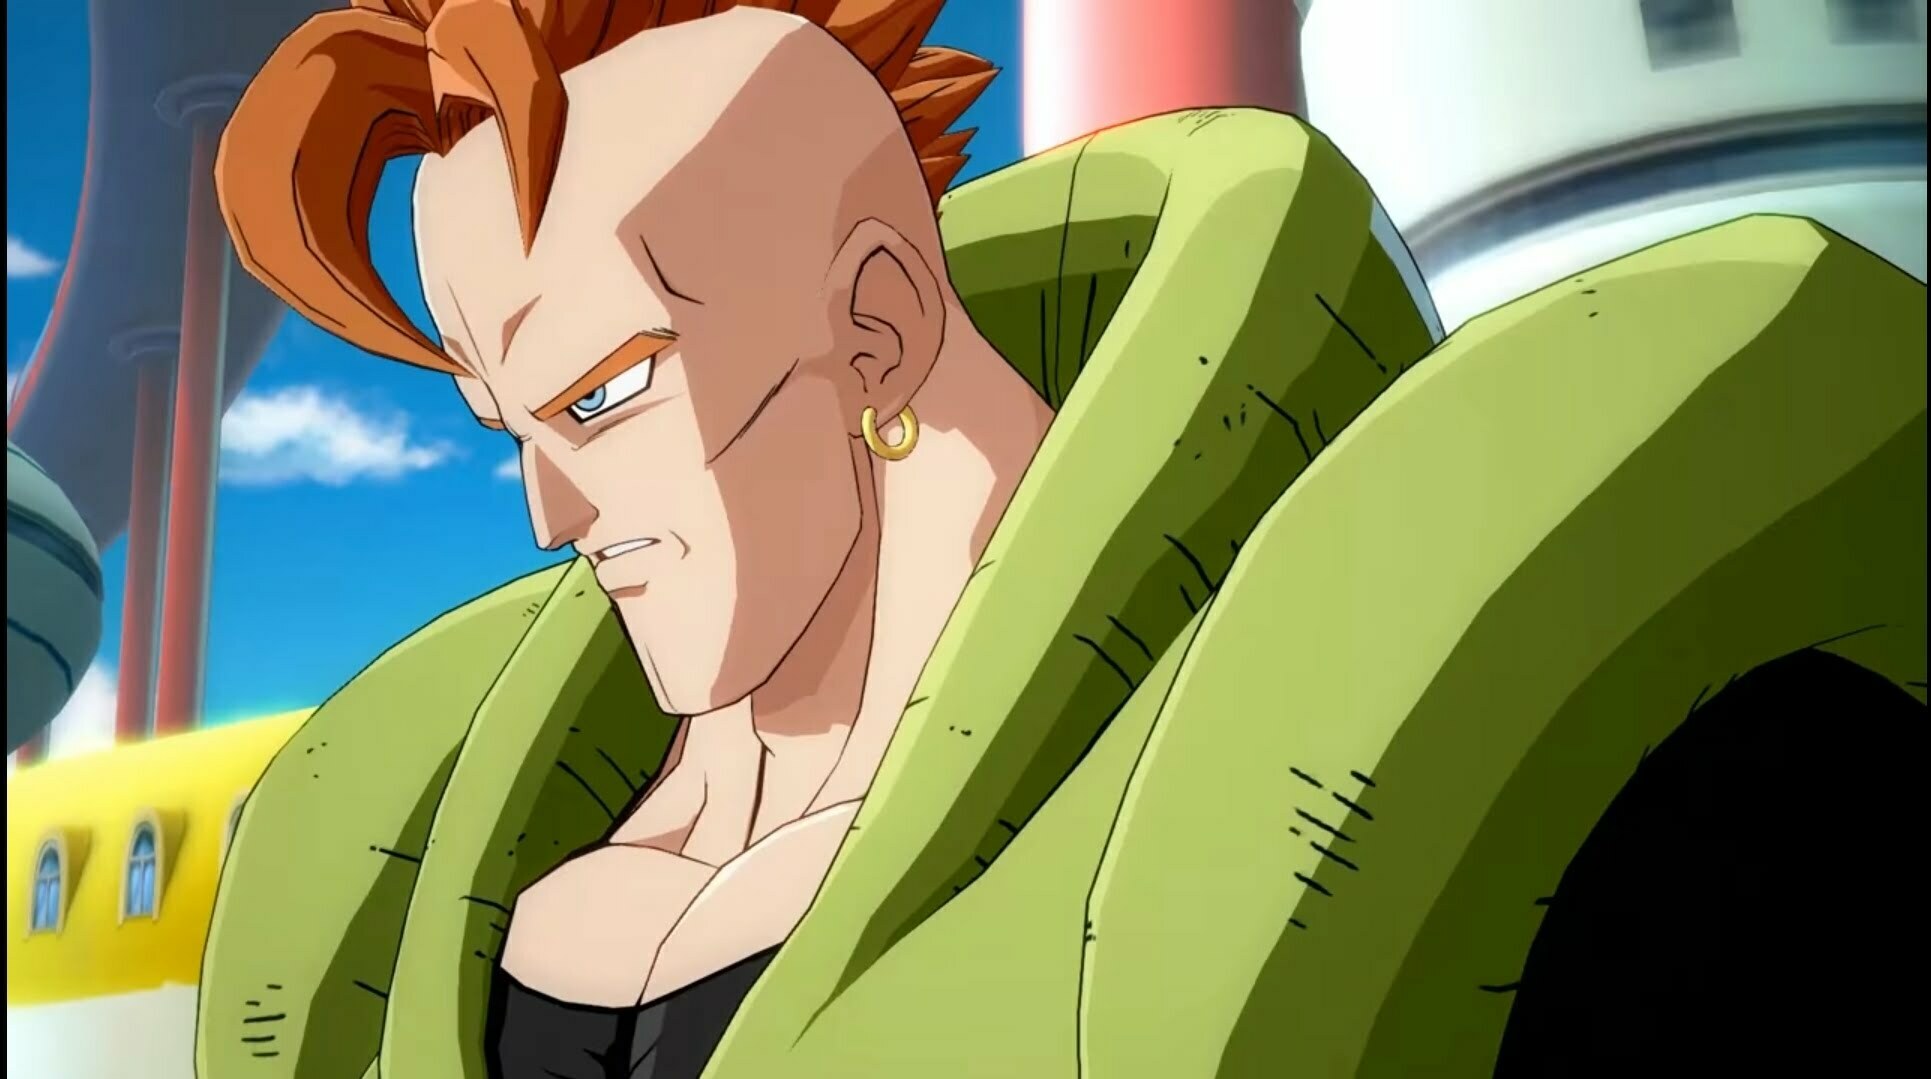 Android 16 in Dragon ball fighterz 